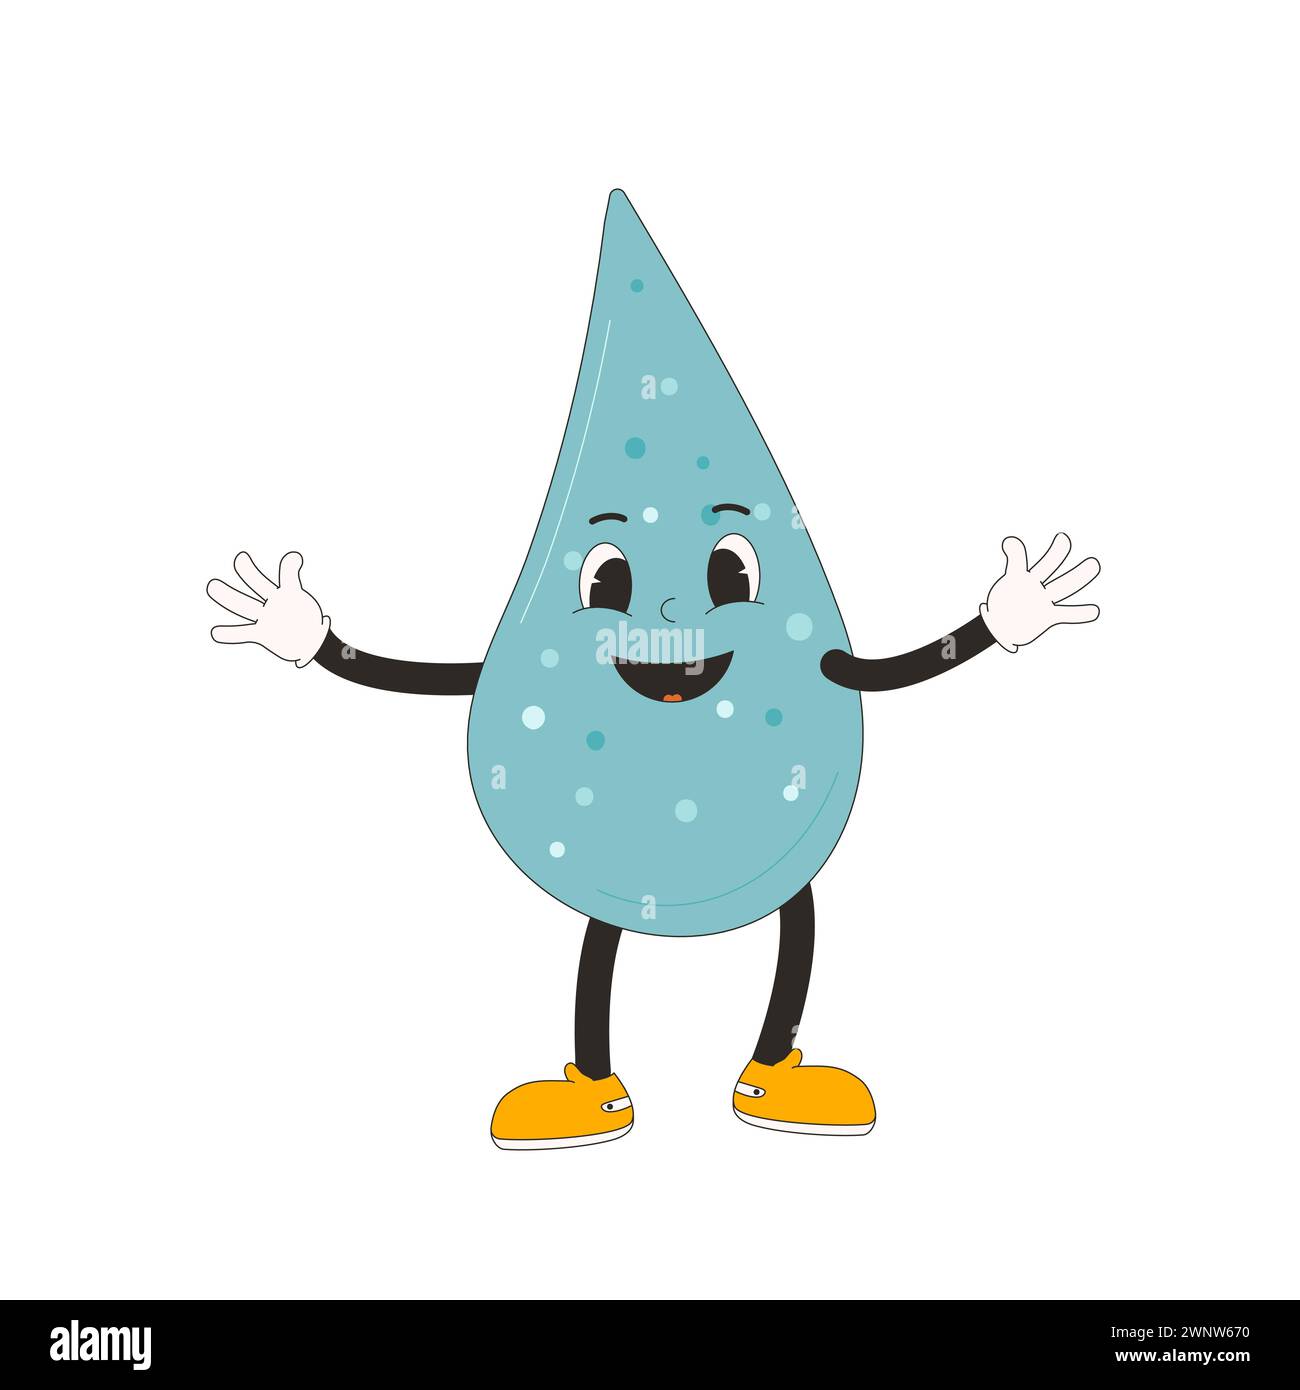 Water drop cartoon mascot. Drink rubber hose animation style groovy smiling character Drink more water. Ecologic and wellness vector flat illustration Stock Vector